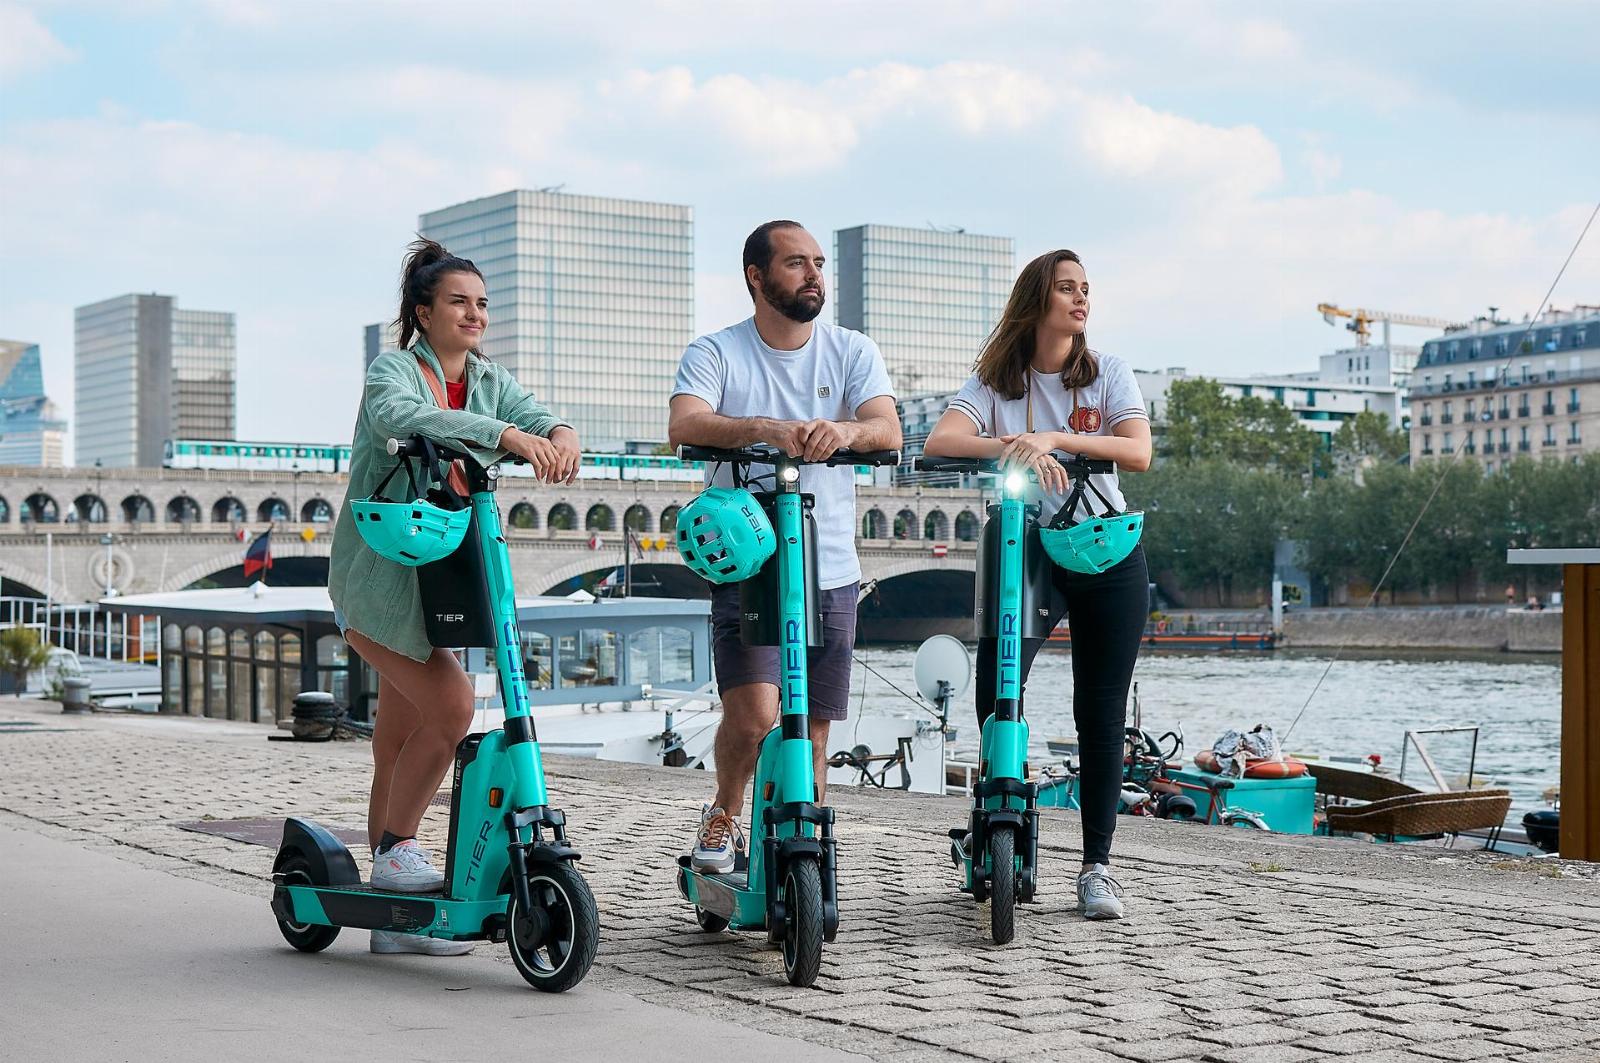 Paris to hold vote on shared scooters